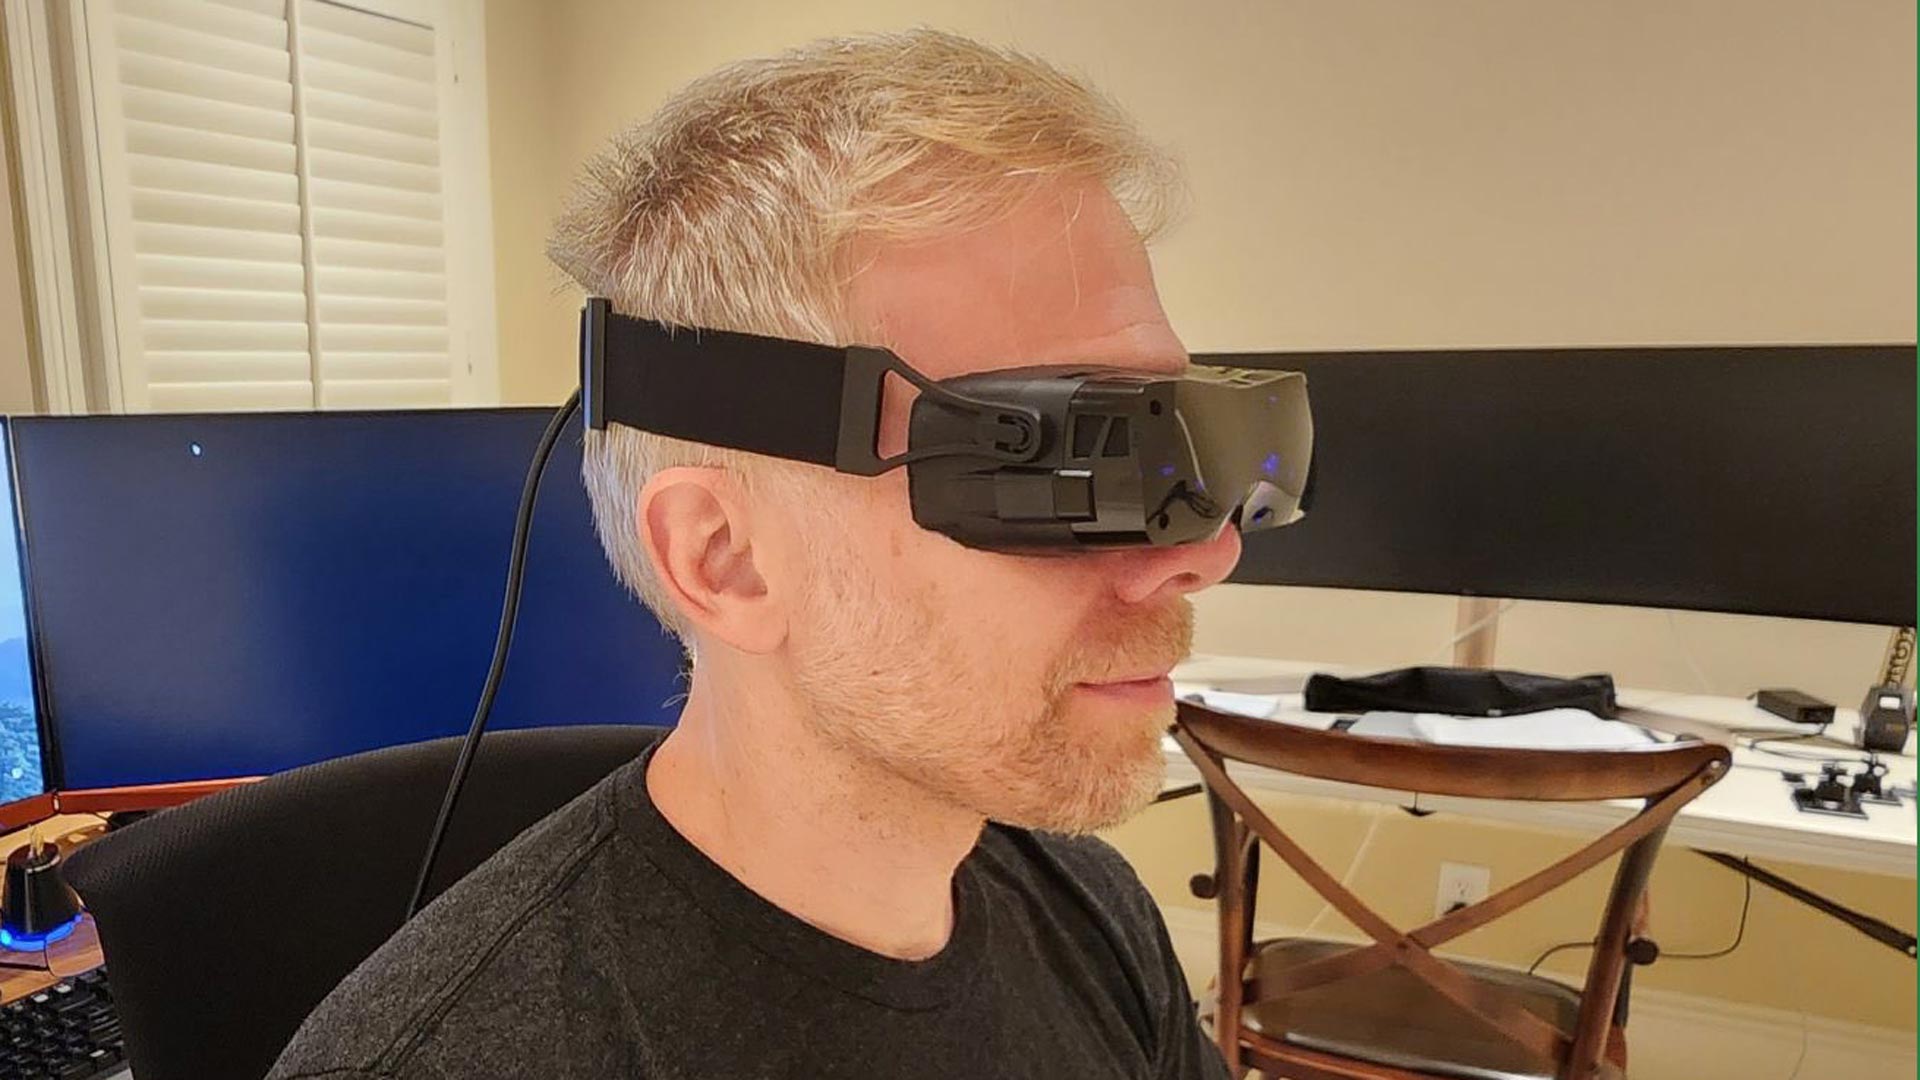 Introducing Bigscreen Beyond, the world's smallest VR headset 